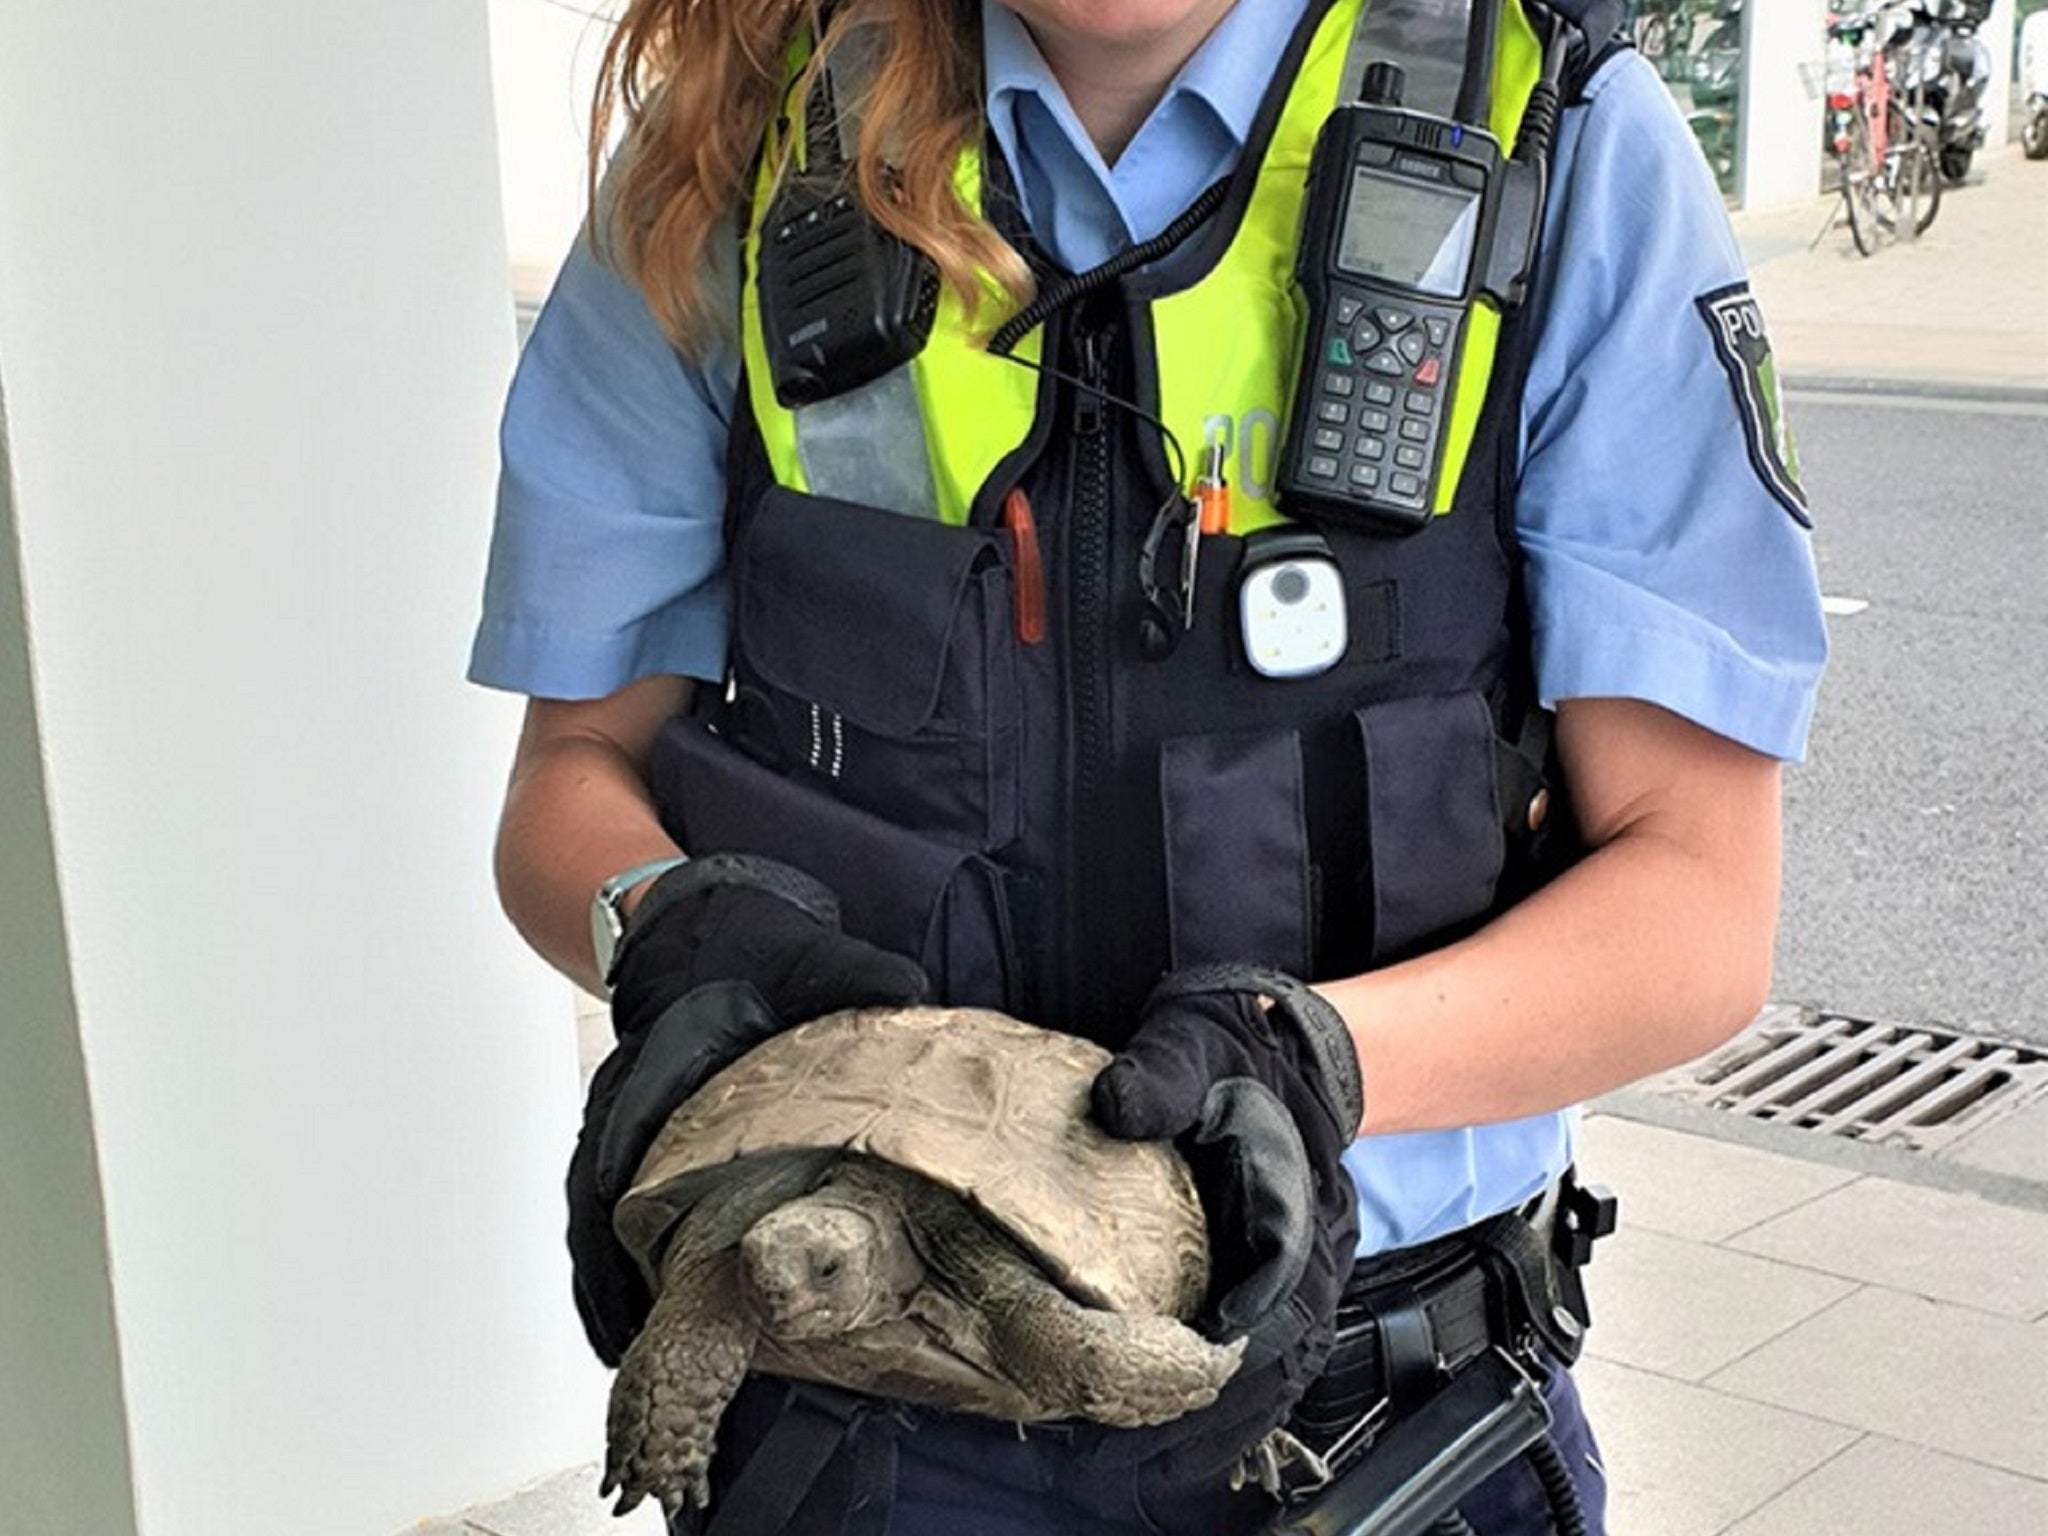 A tortoise, believed to be about 70 years old, sparked a police operation after trying to cross the road at a busy junction in the Rodenkirchen district of Cologne on 3 June 2019.